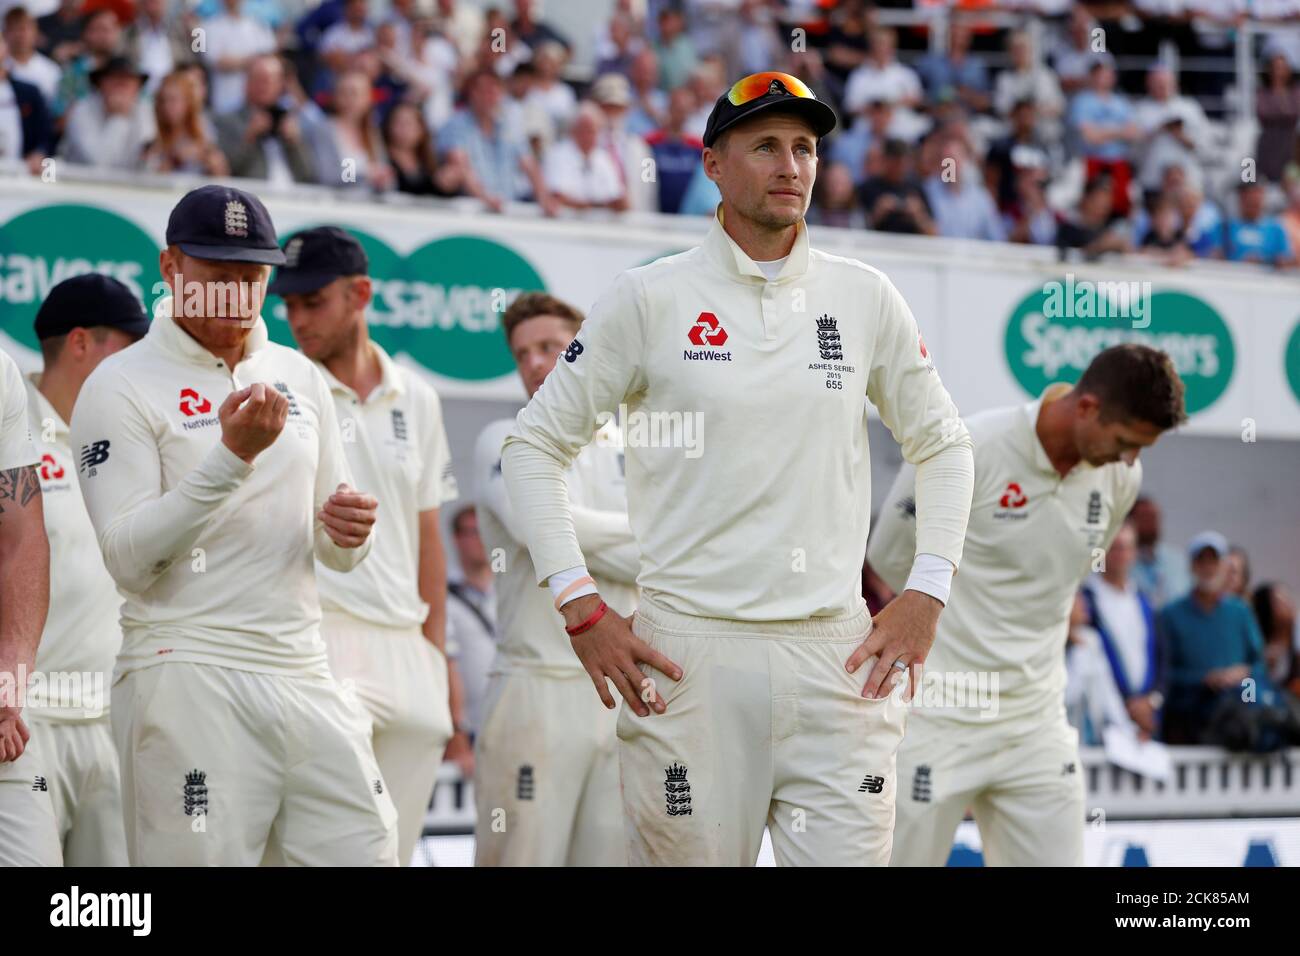 Cricket - Ashes 2019 - Fifth Test - England v Australia - Kia Oval, London, Britain - September 15, 2019   England's Joe Root and teammates before the end of series presentations  Action Images via Reuters/Paul Childs Stock Photo